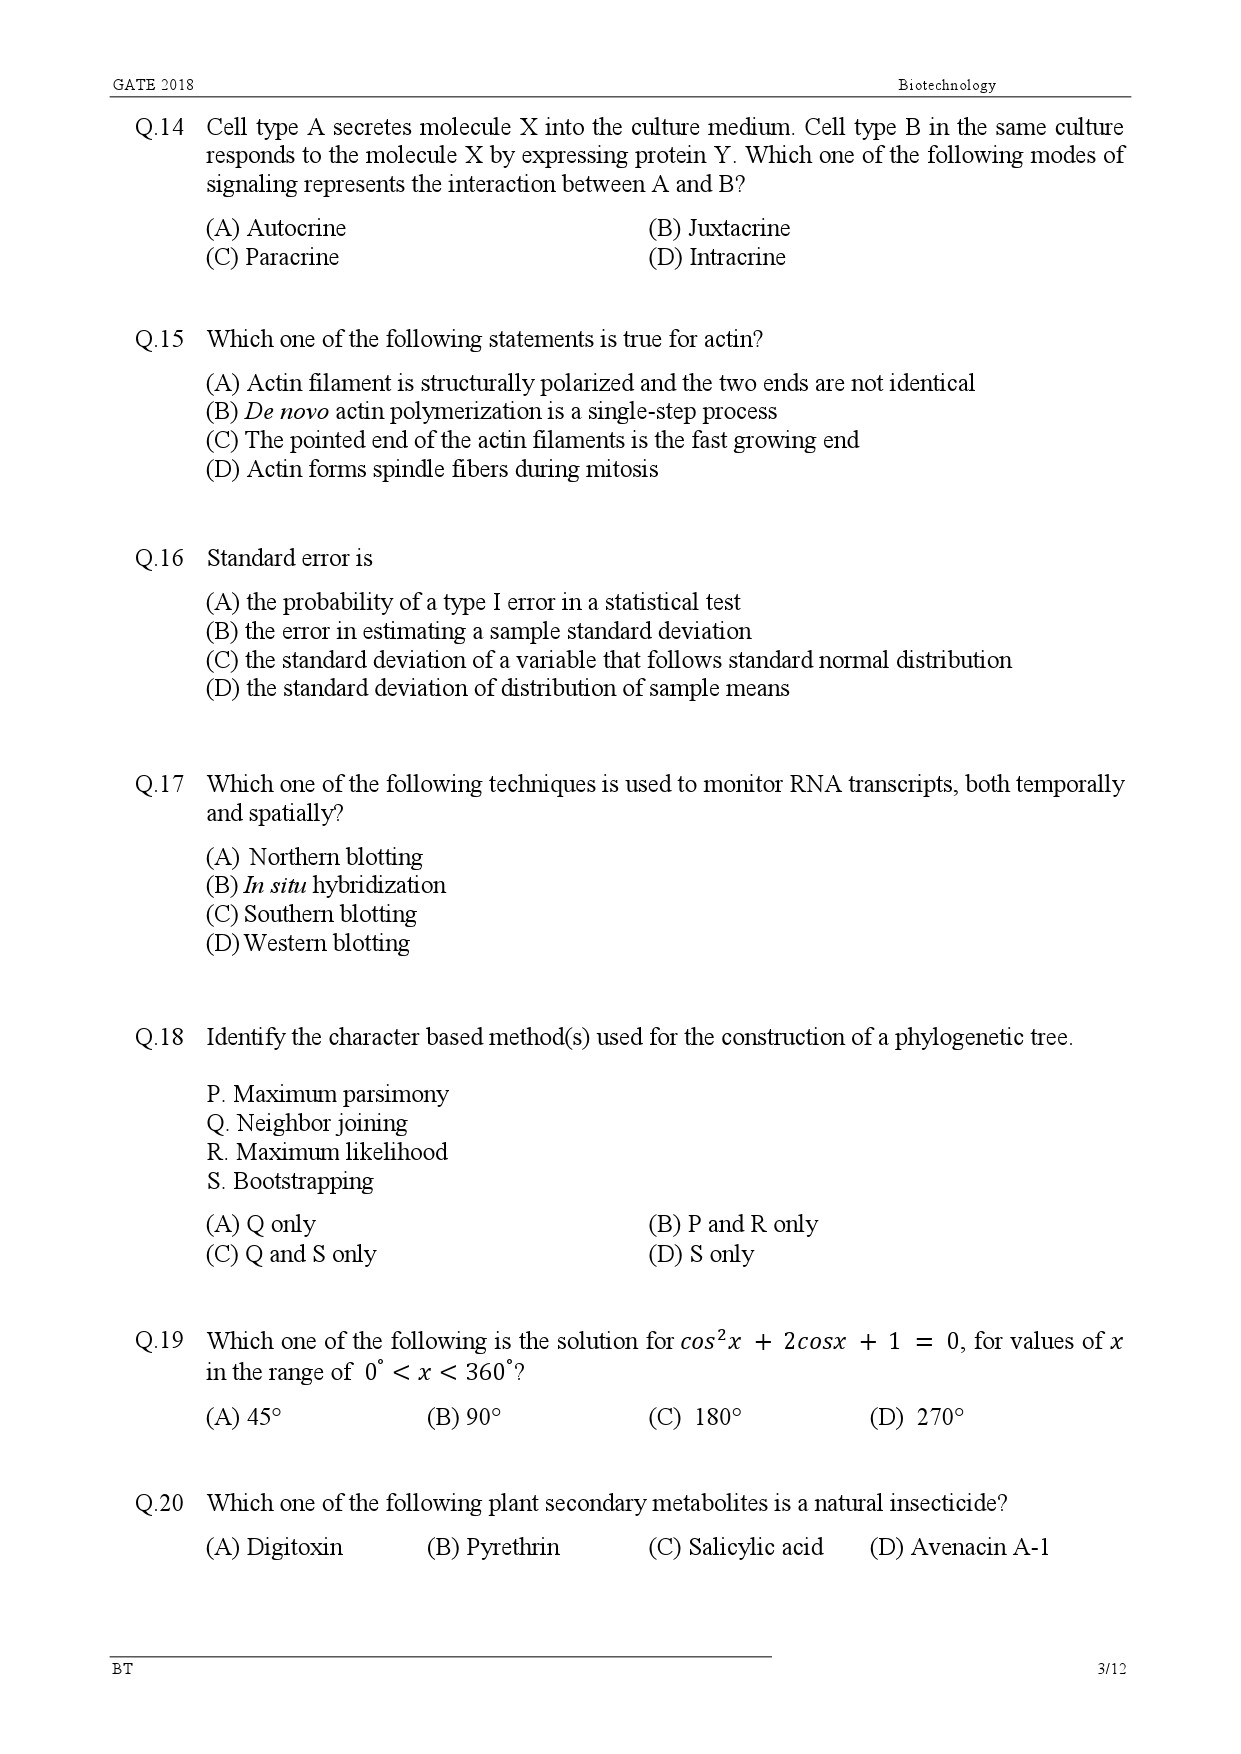 GATE Exam Question Paper 2018 Biotechnology 5